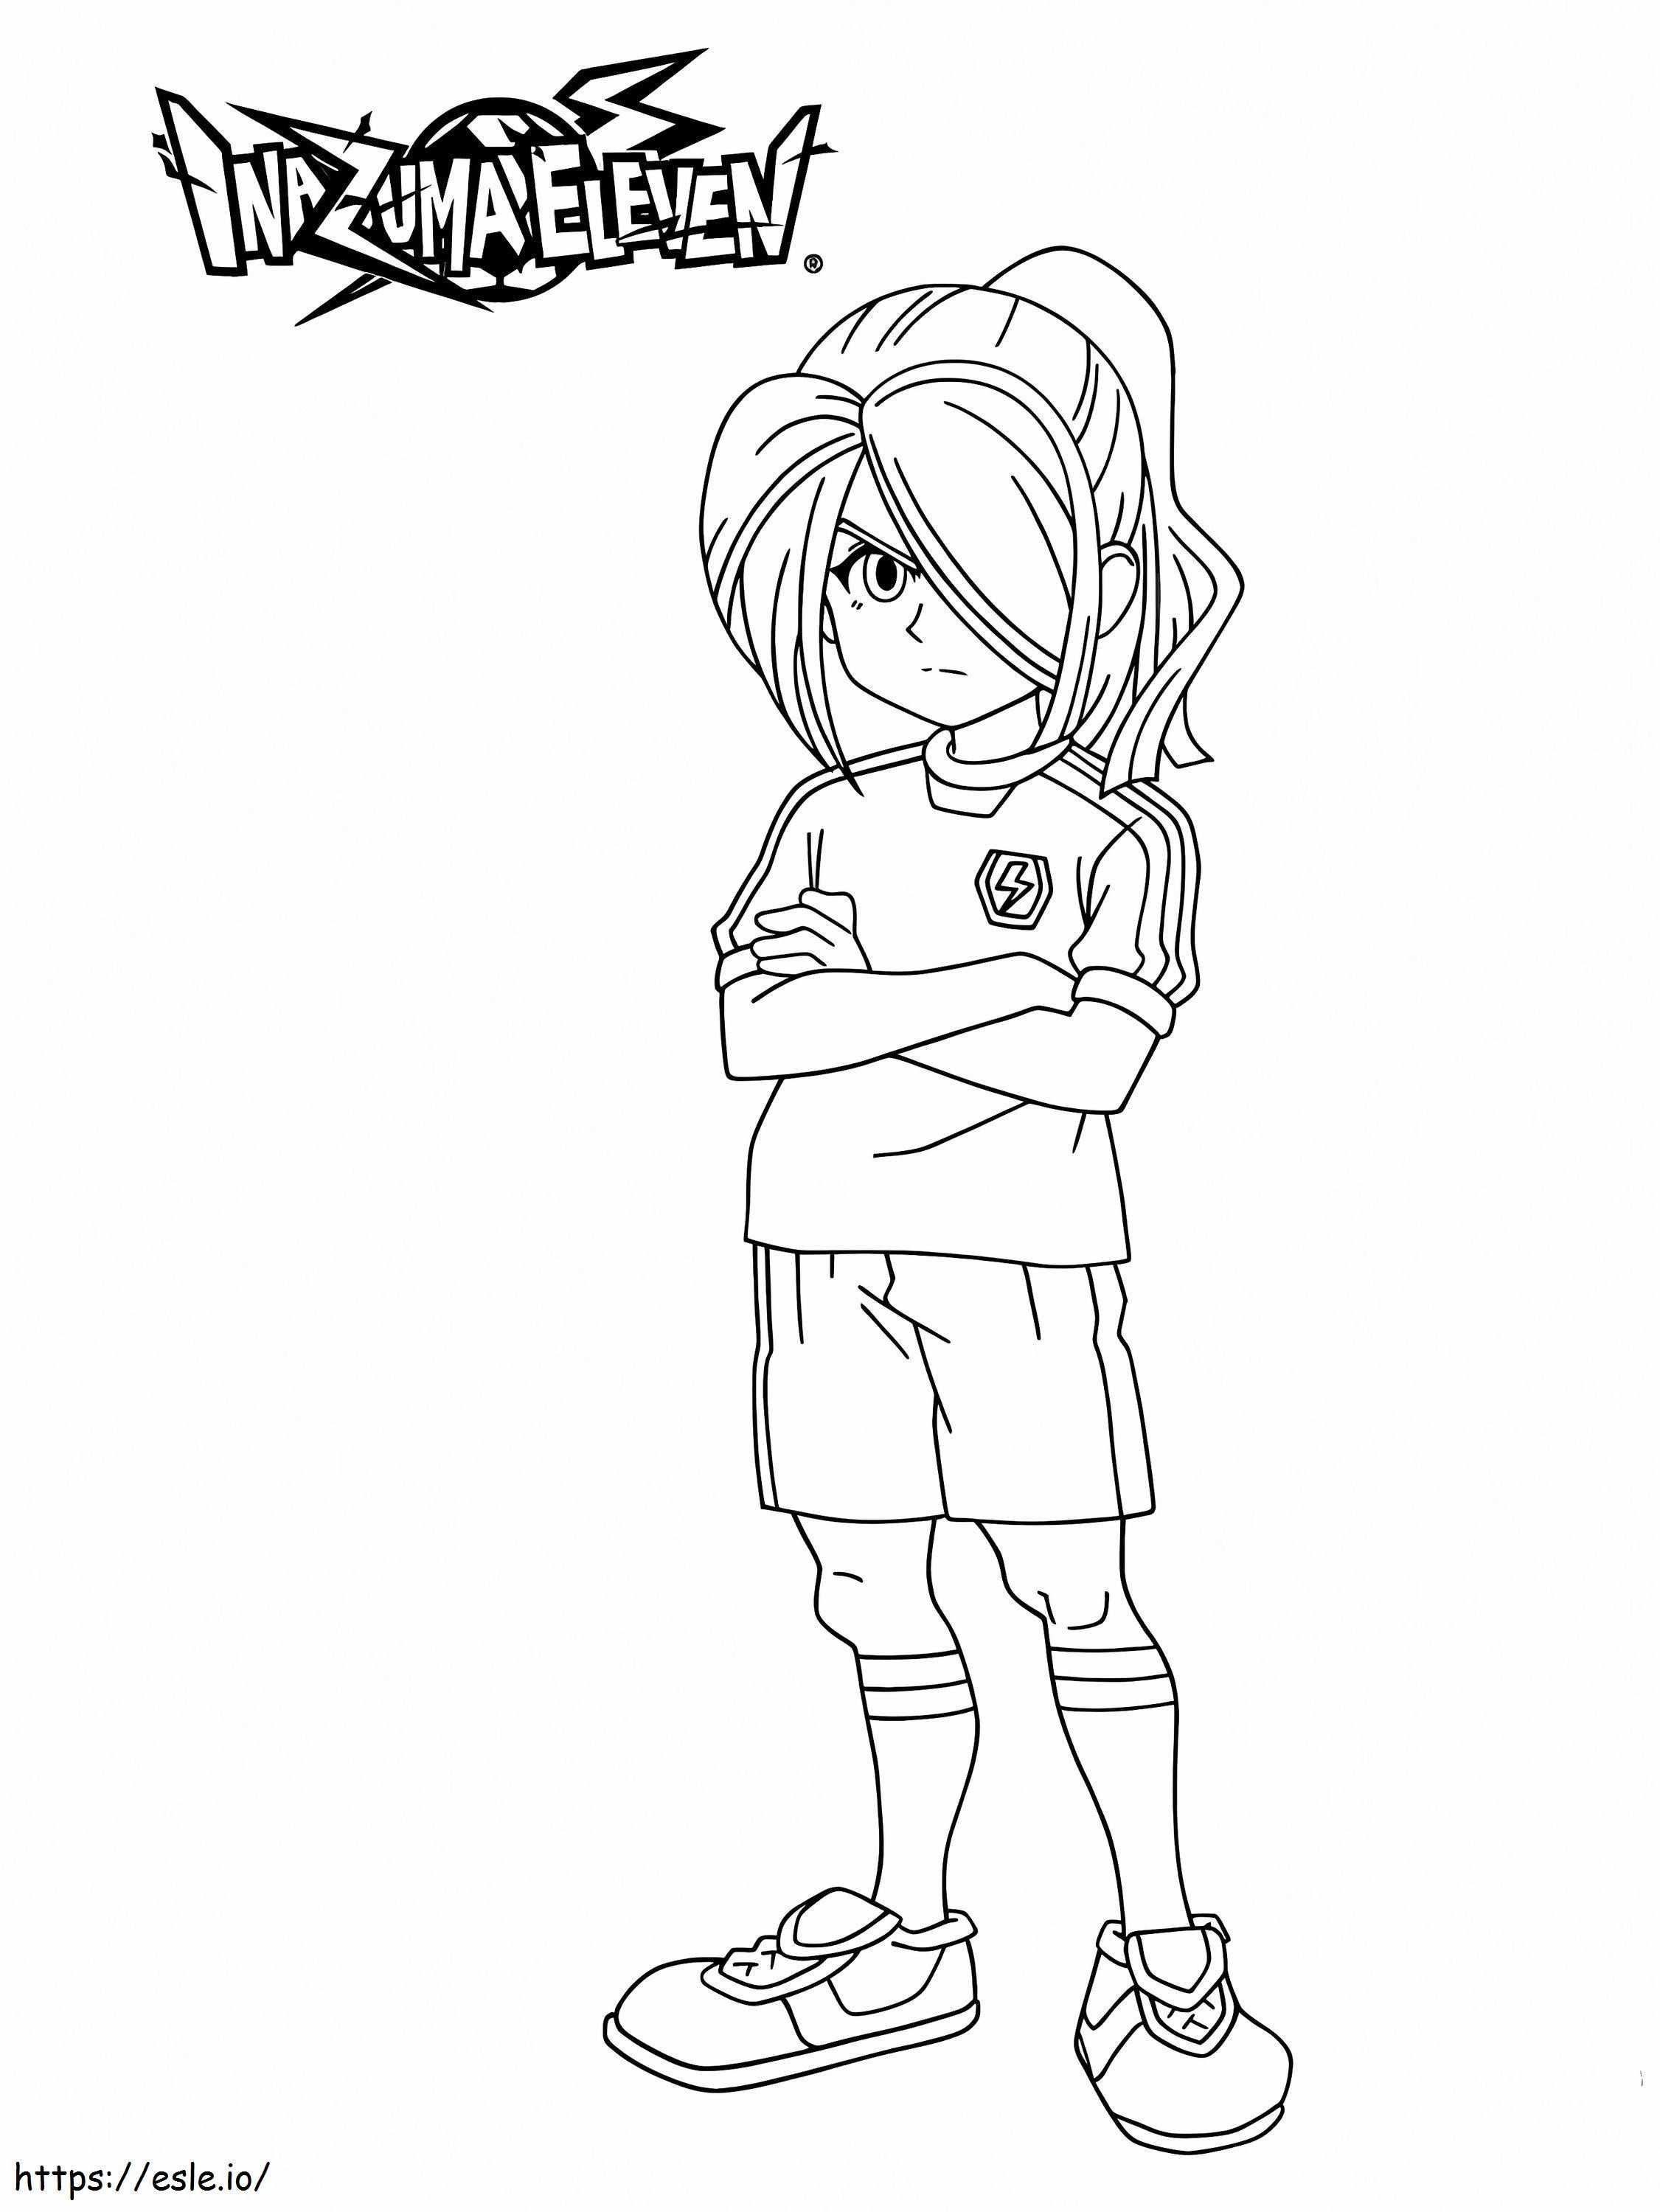 1593134251 Dfsgsdegewt coloring page